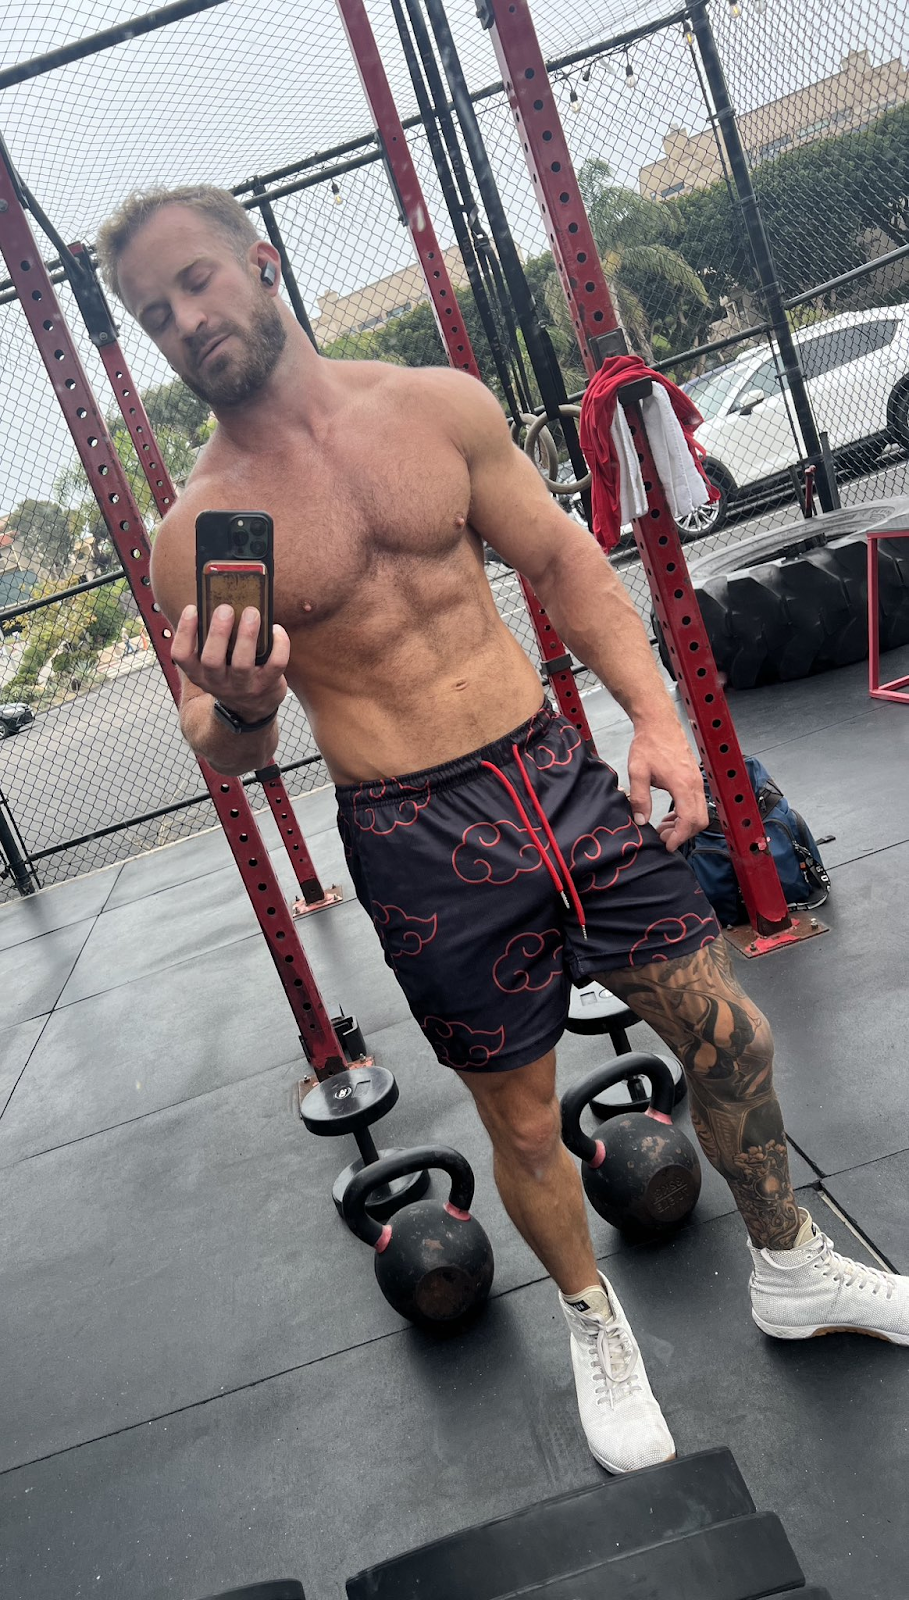 Bruce Jones taking a gay shirtless selfie in an outdoor gym surrounded by weights and kettlebells